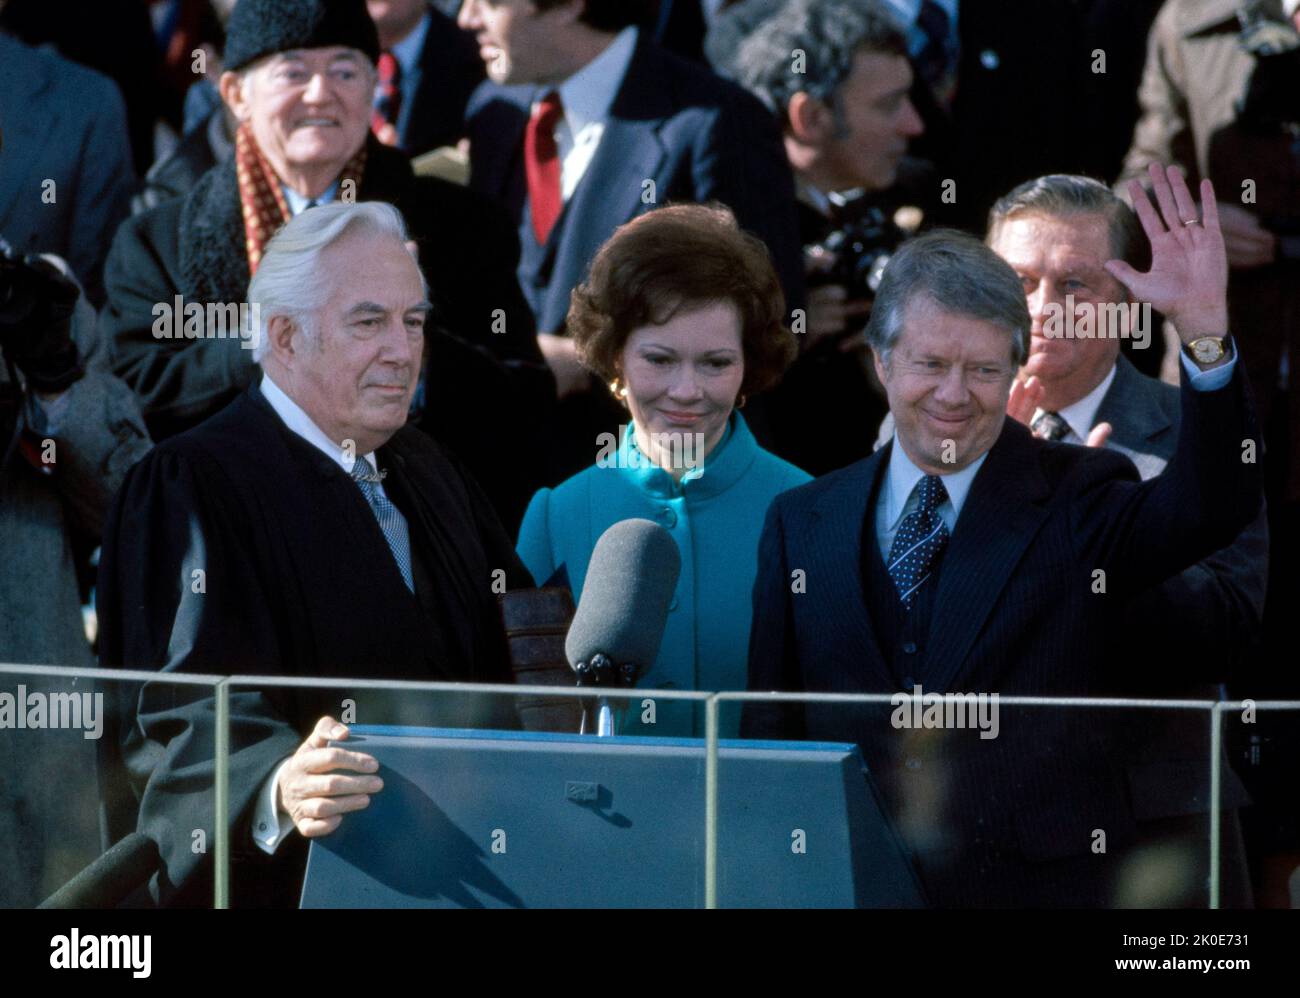 The inauguration of Jimmy Carter as the 39th president of the United States was held on Thursday, January 20, 1977, at the East Portico of the United States Capitol in Washington D.C. Chief Justice Warren E. Burger administered the presidential oath of office to Carter. Stock Photo